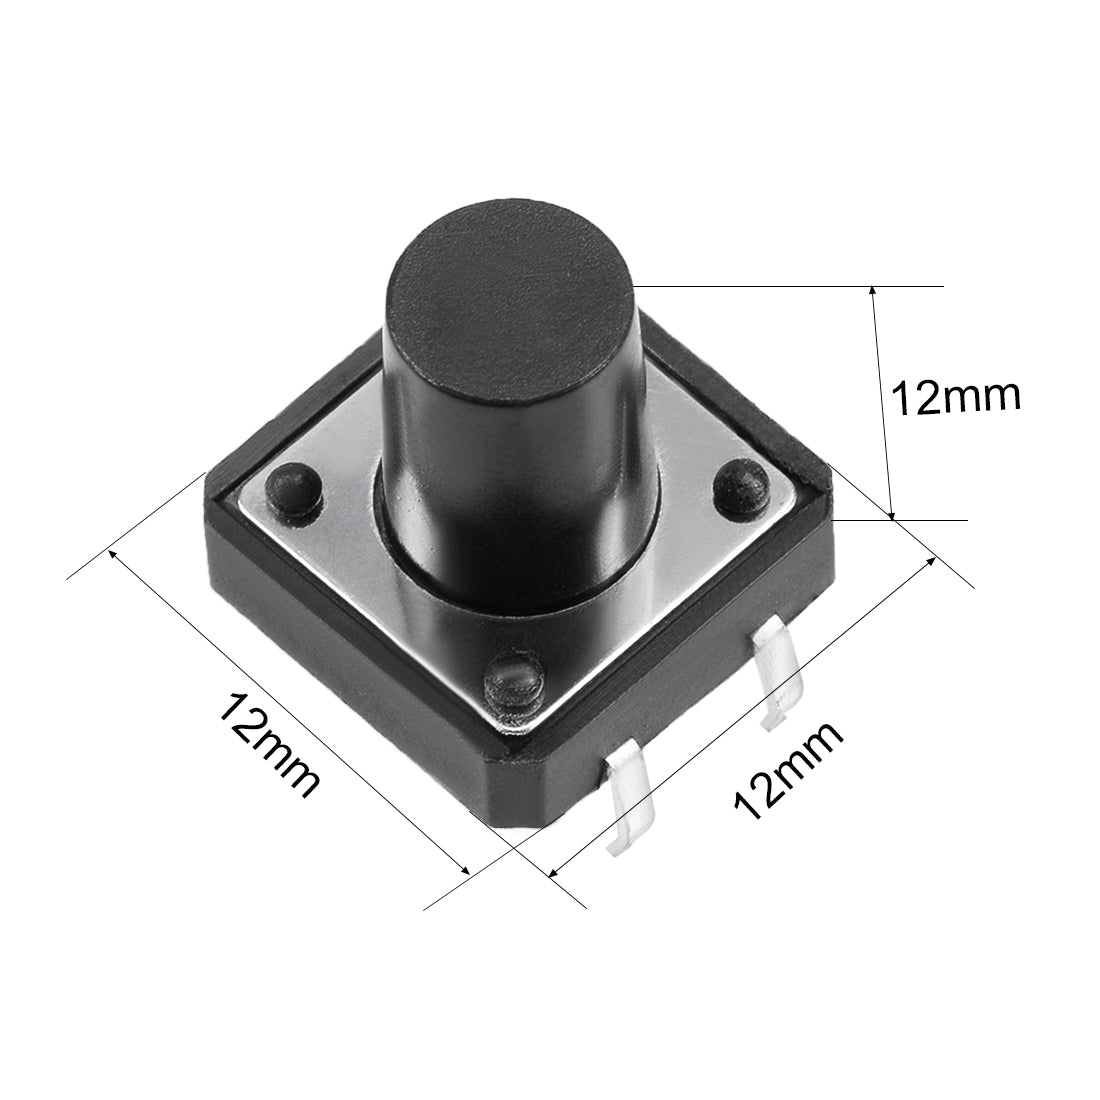 uxcell Uxcell 12x12x12mm 4 Pin Panel Mini/Micro/Small PCB Momentary Tactile Tact Push Button Switch DIP 10PCS